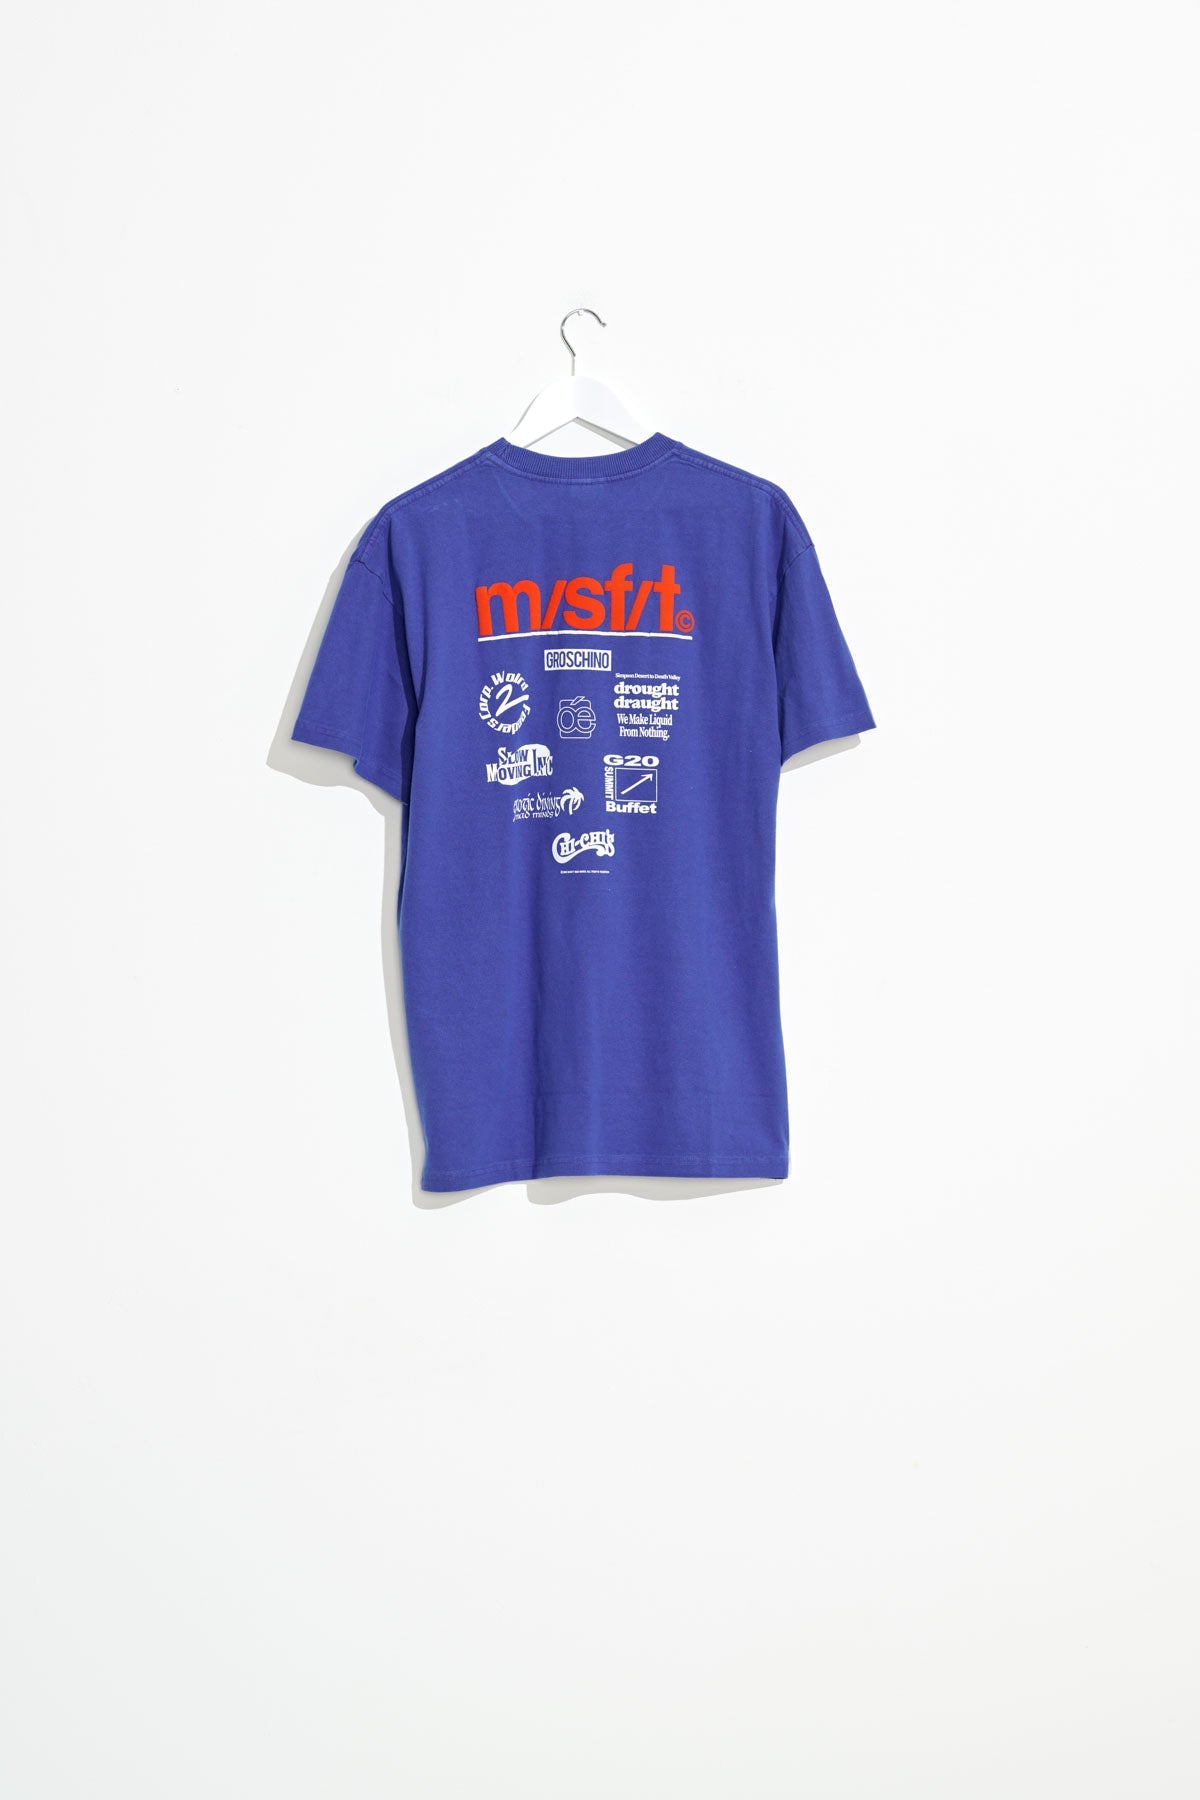 Misfit Shapes - United Needs 50-50 Aaa SS Tee - Pigment Navy Blue